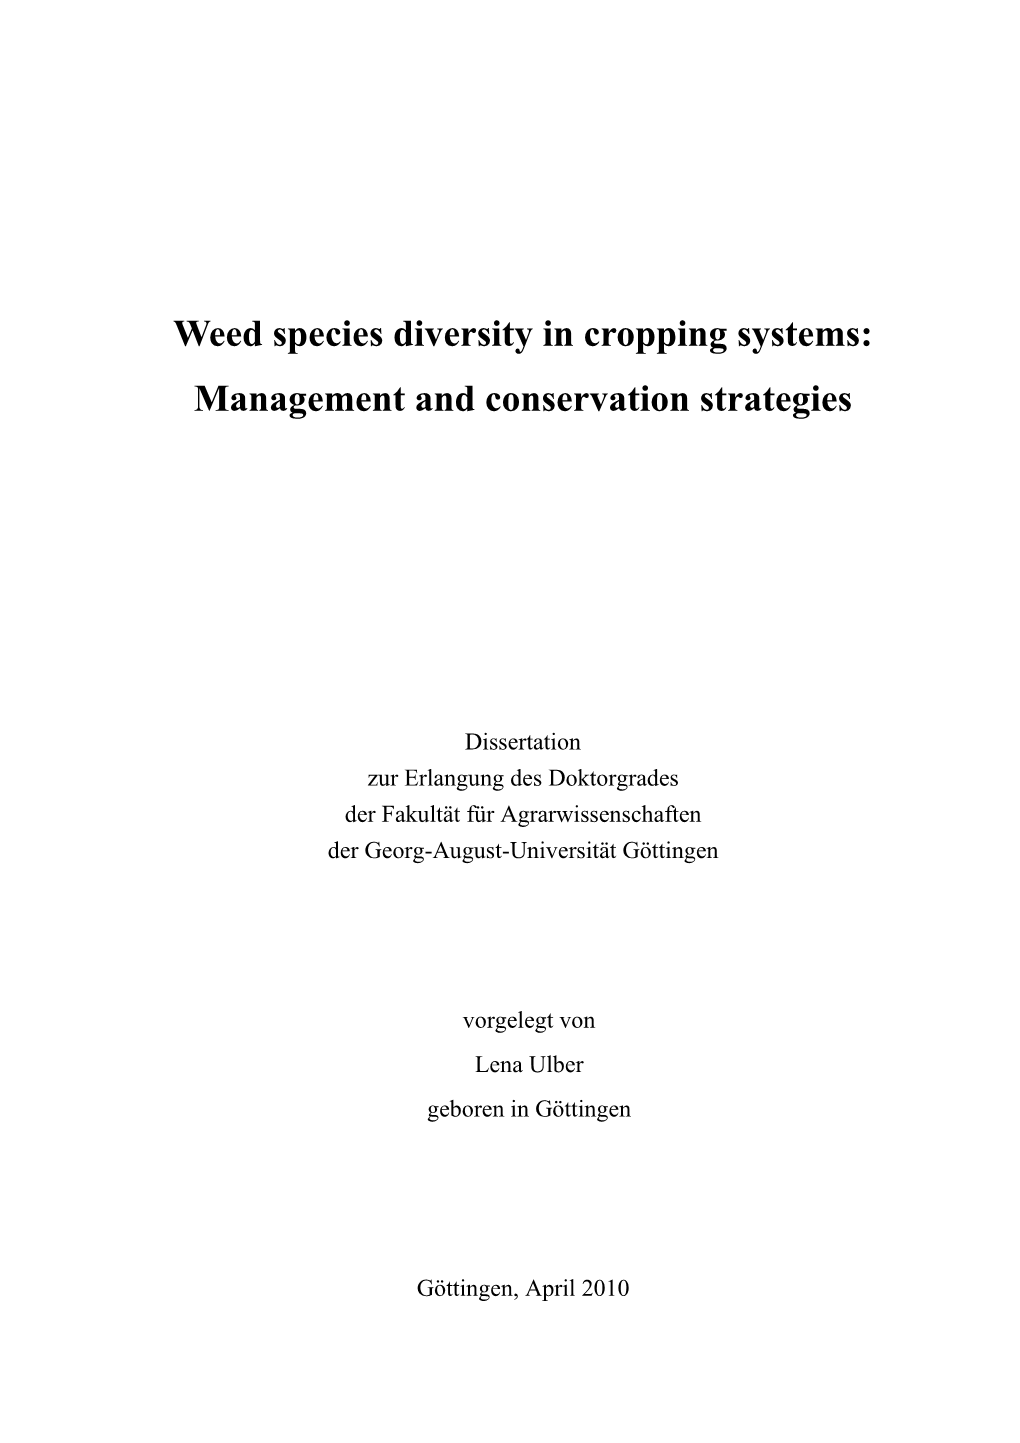 Weed Species Diversity in Cropping Systems: Management and Conservation Strategies